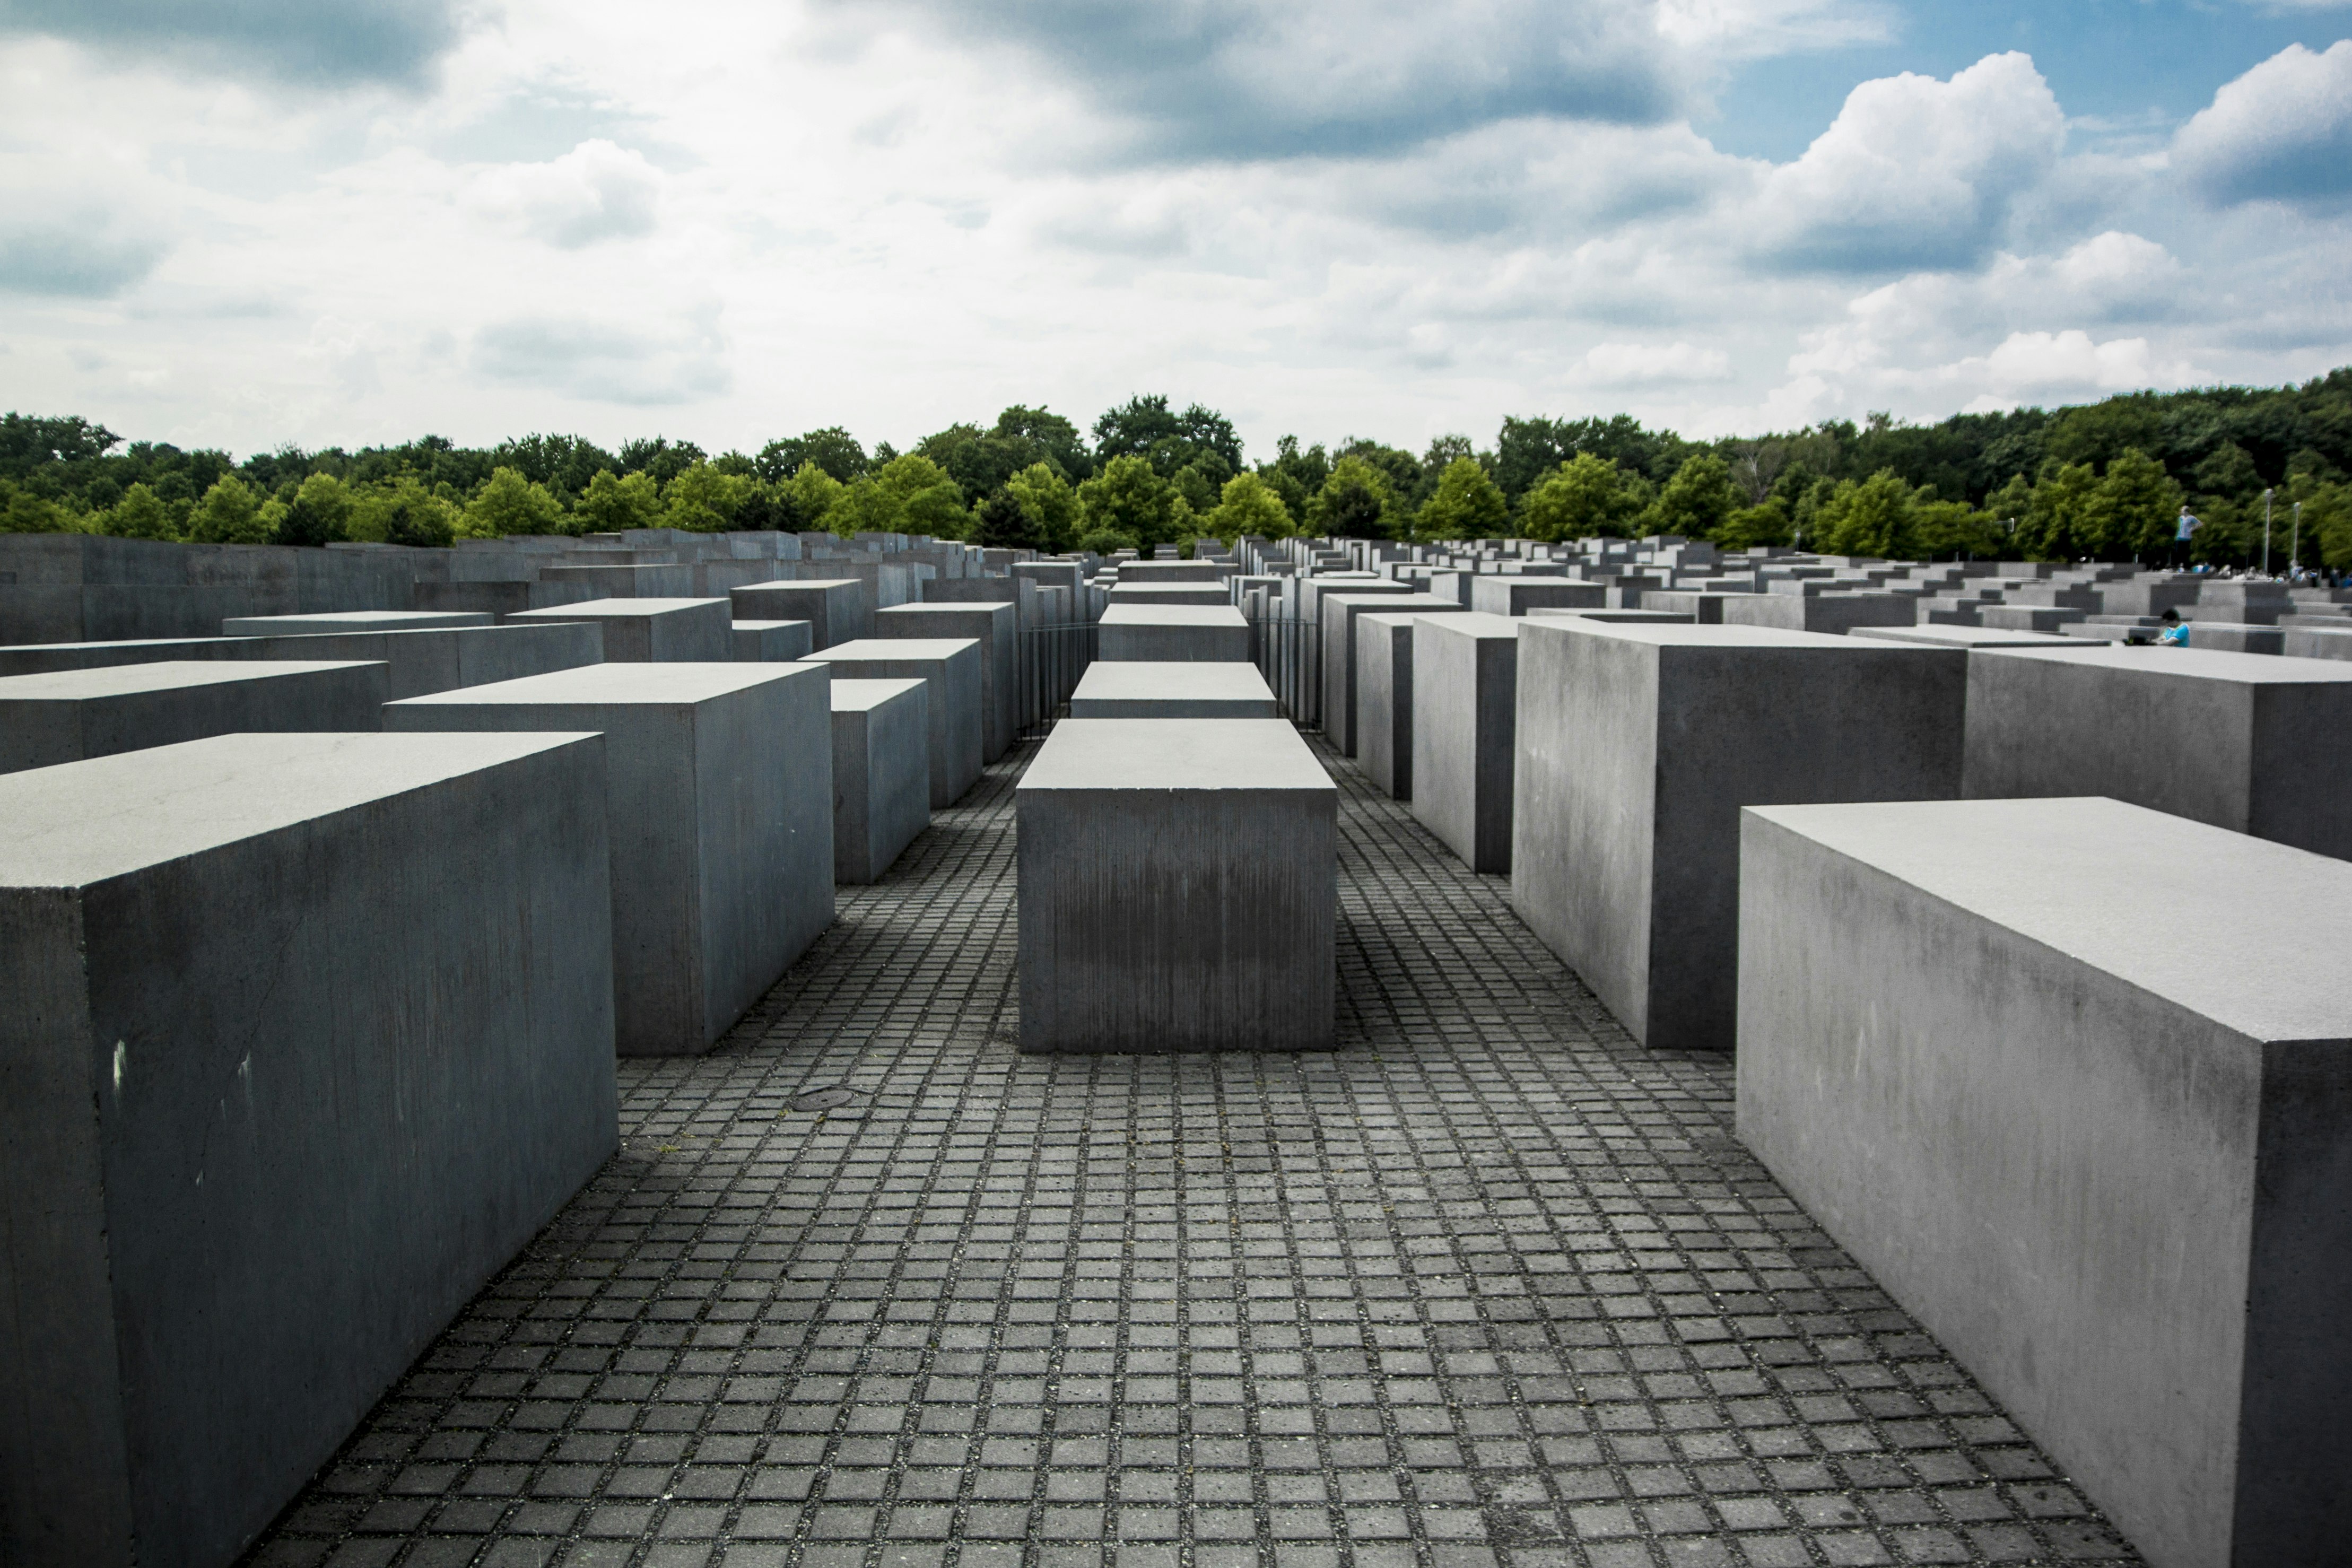 In the middle of the city is the Memorial to the Murdered Jews of Europe, and imposing place of remembrance and warning.

A place of contemplation, a place of remembrance and warning. Close to the Brandenburg Gate in the heart of Berlin you will find the Memorial to the Murdered Jews of Europe.